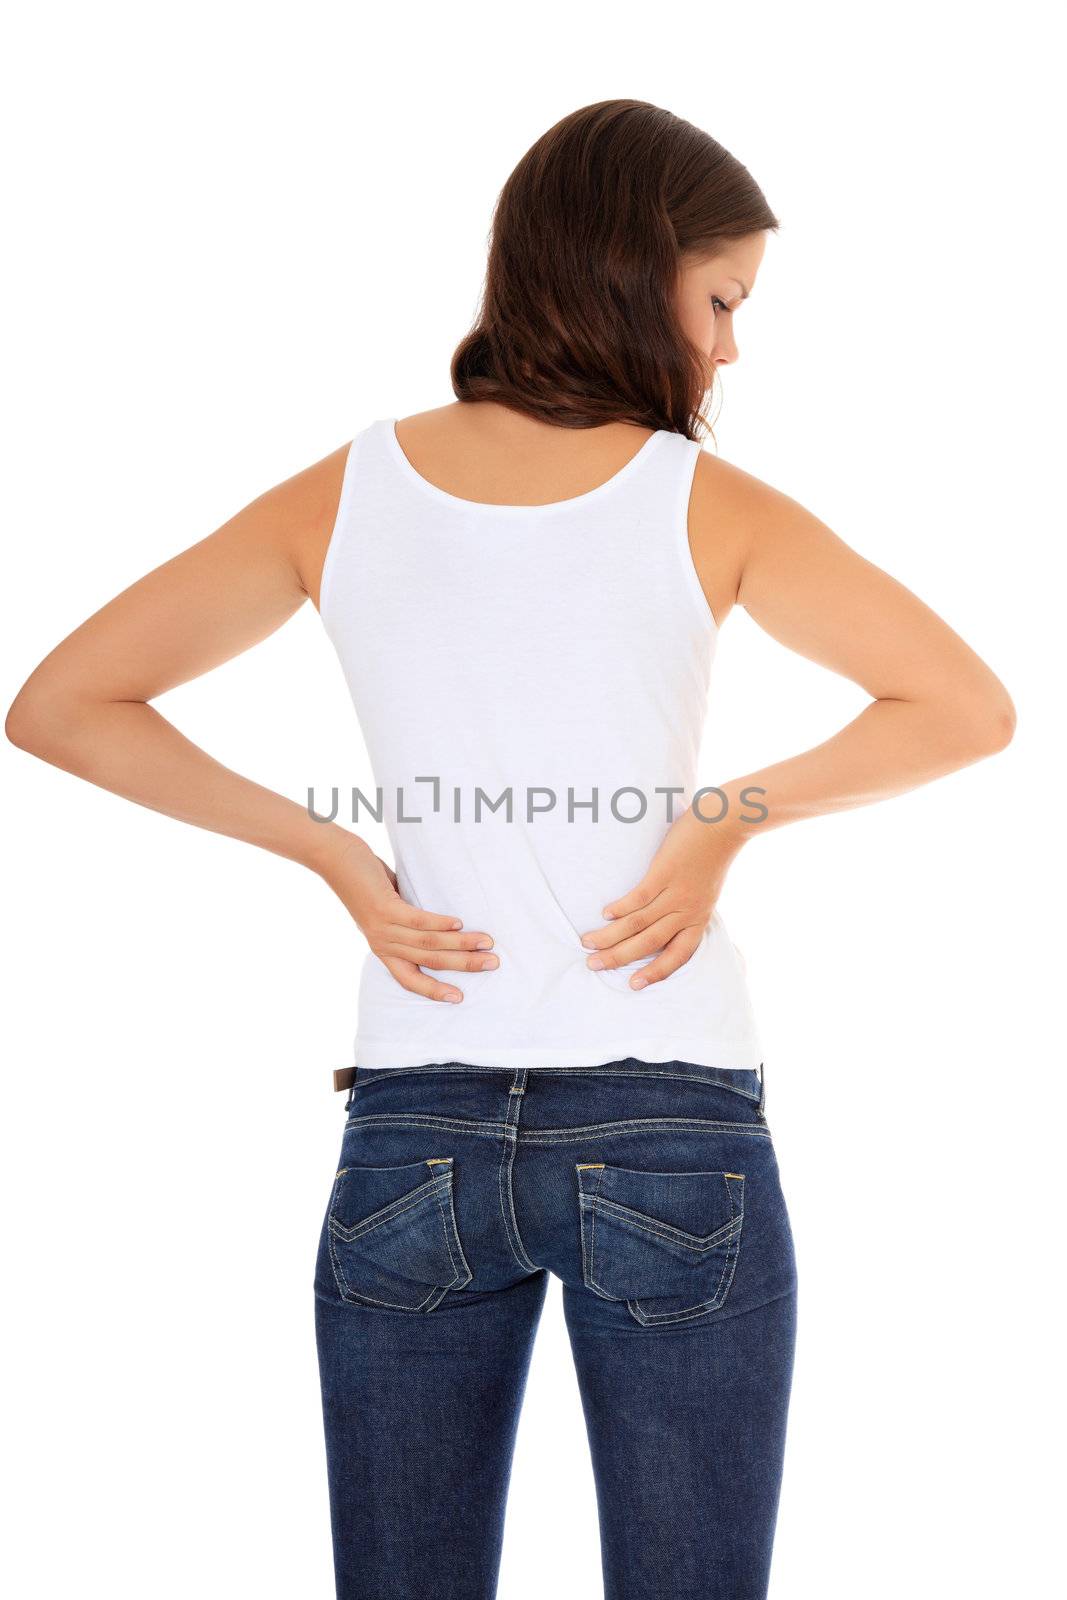 Attractive young woman suffers from back pain. All on white background.